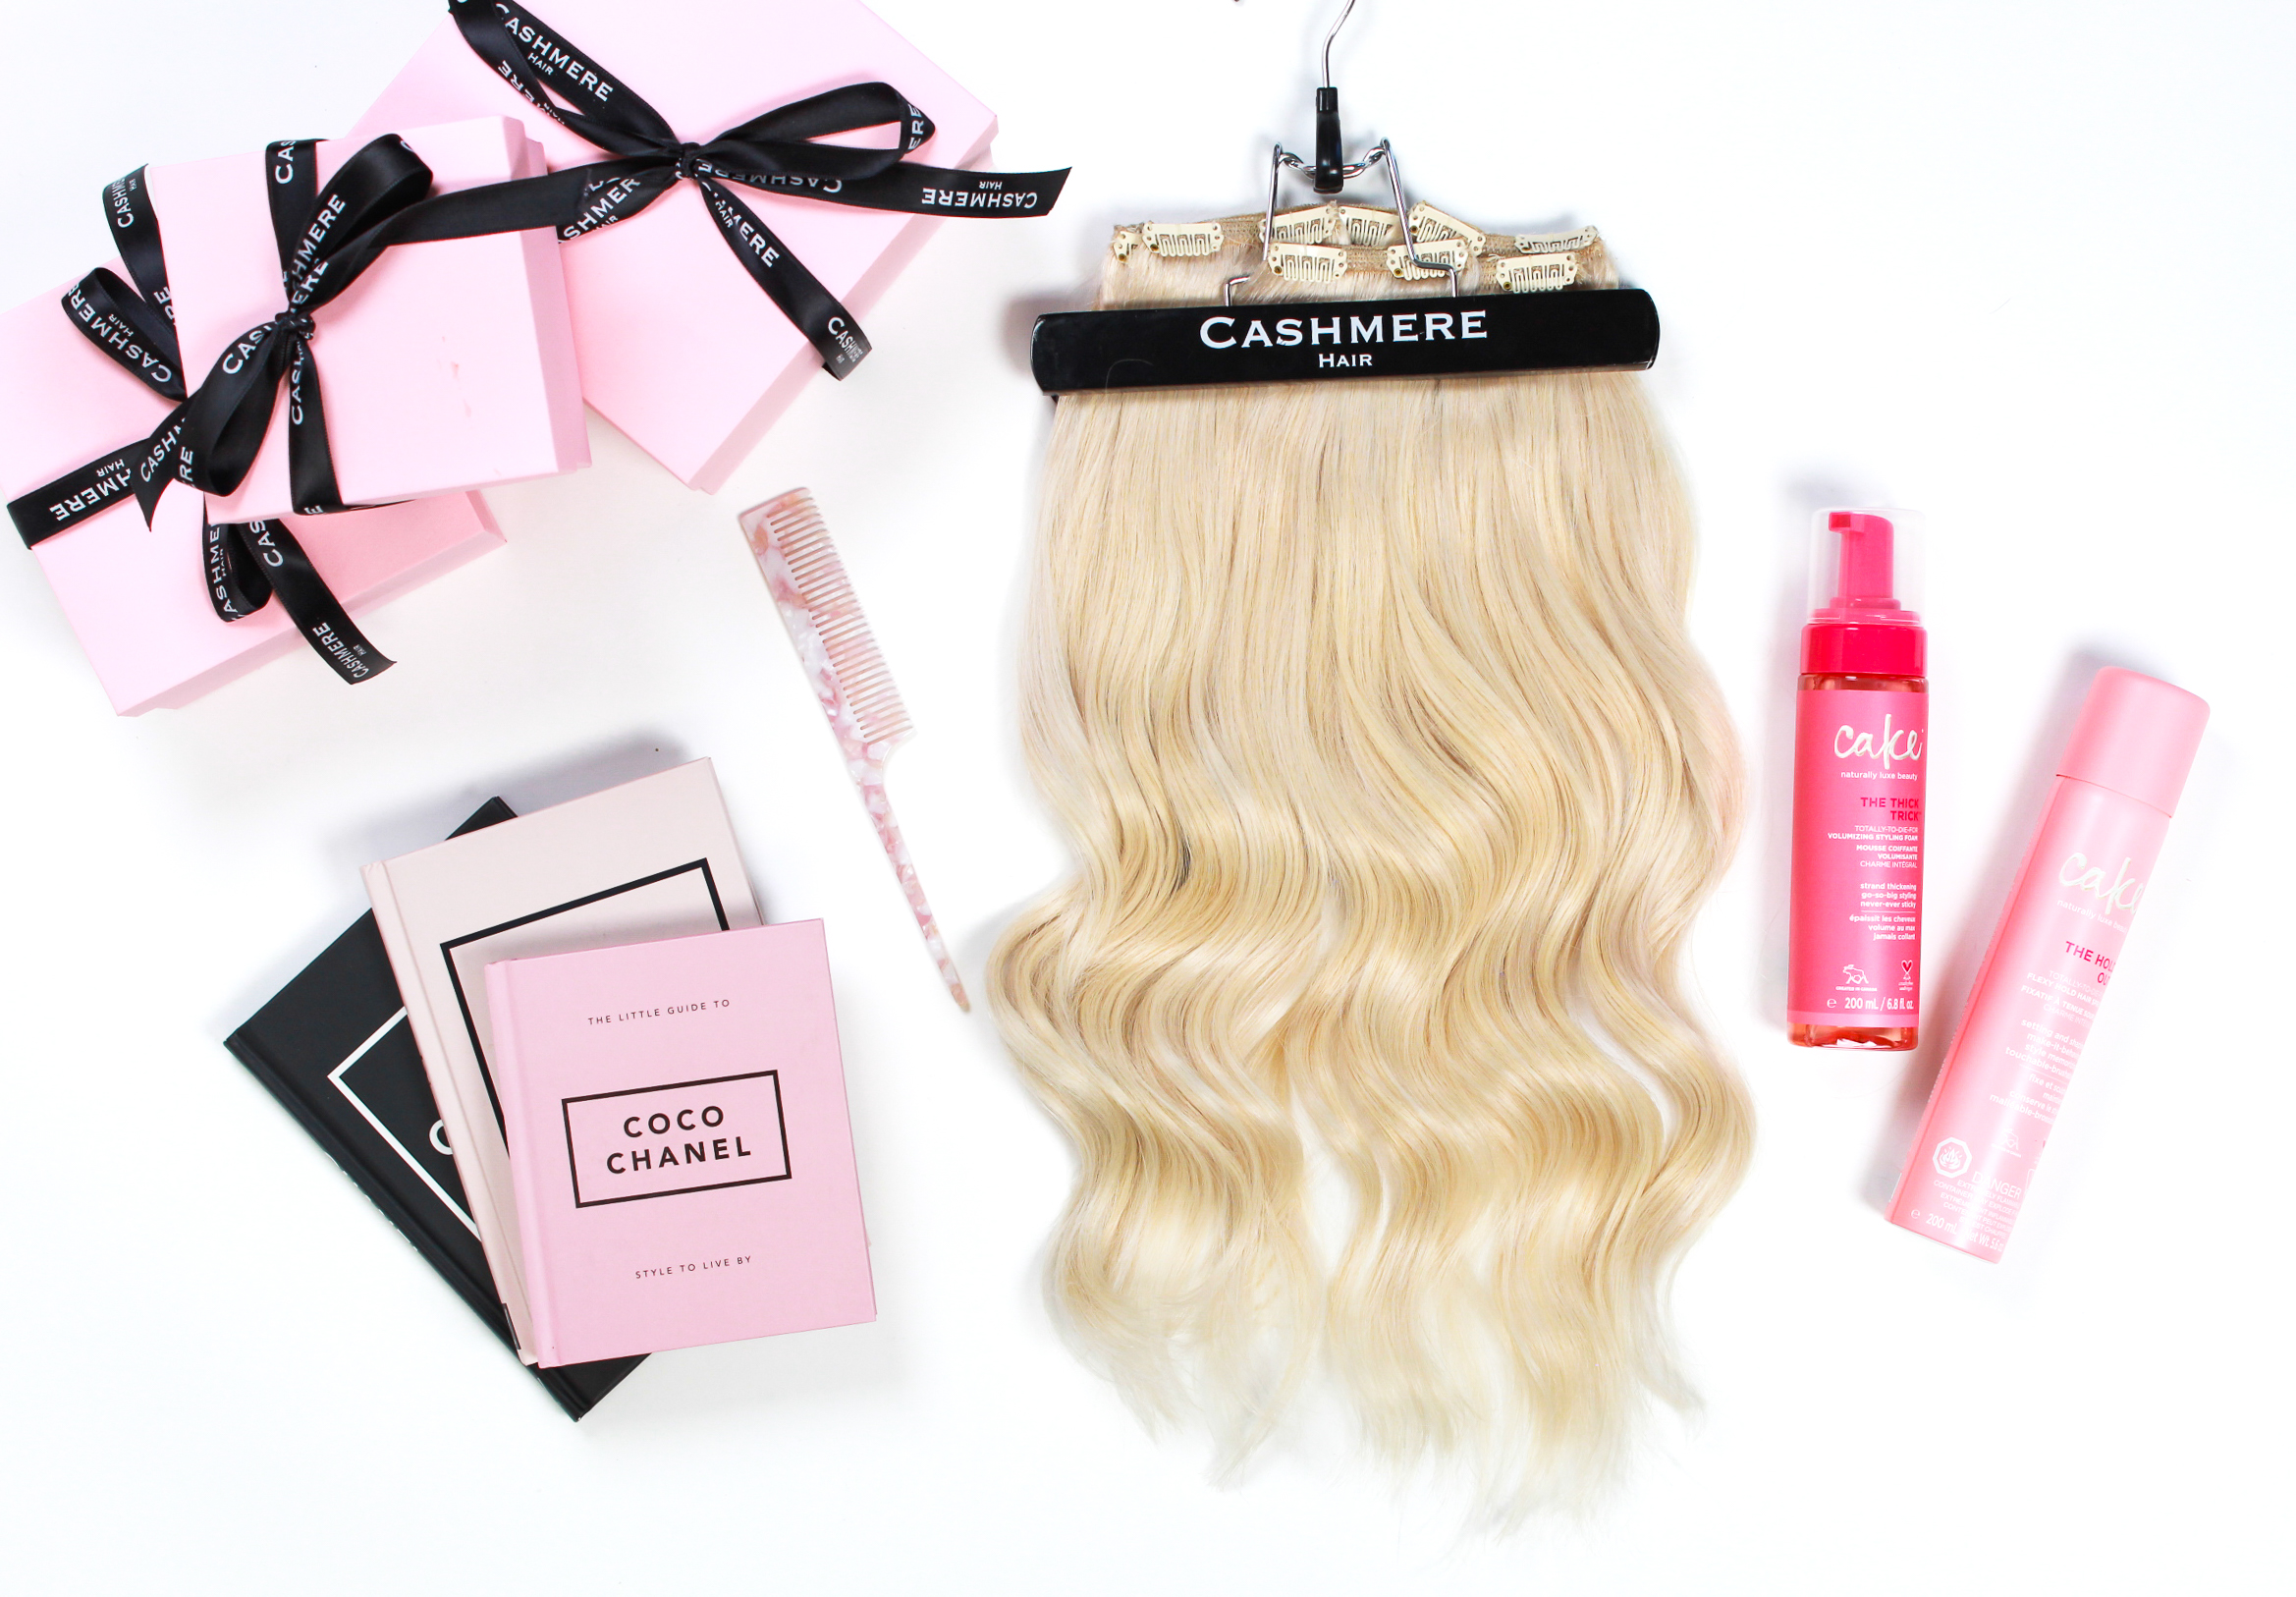 Cashmere hair classic clip in extensions, cake beauty products and a wide tooth comb